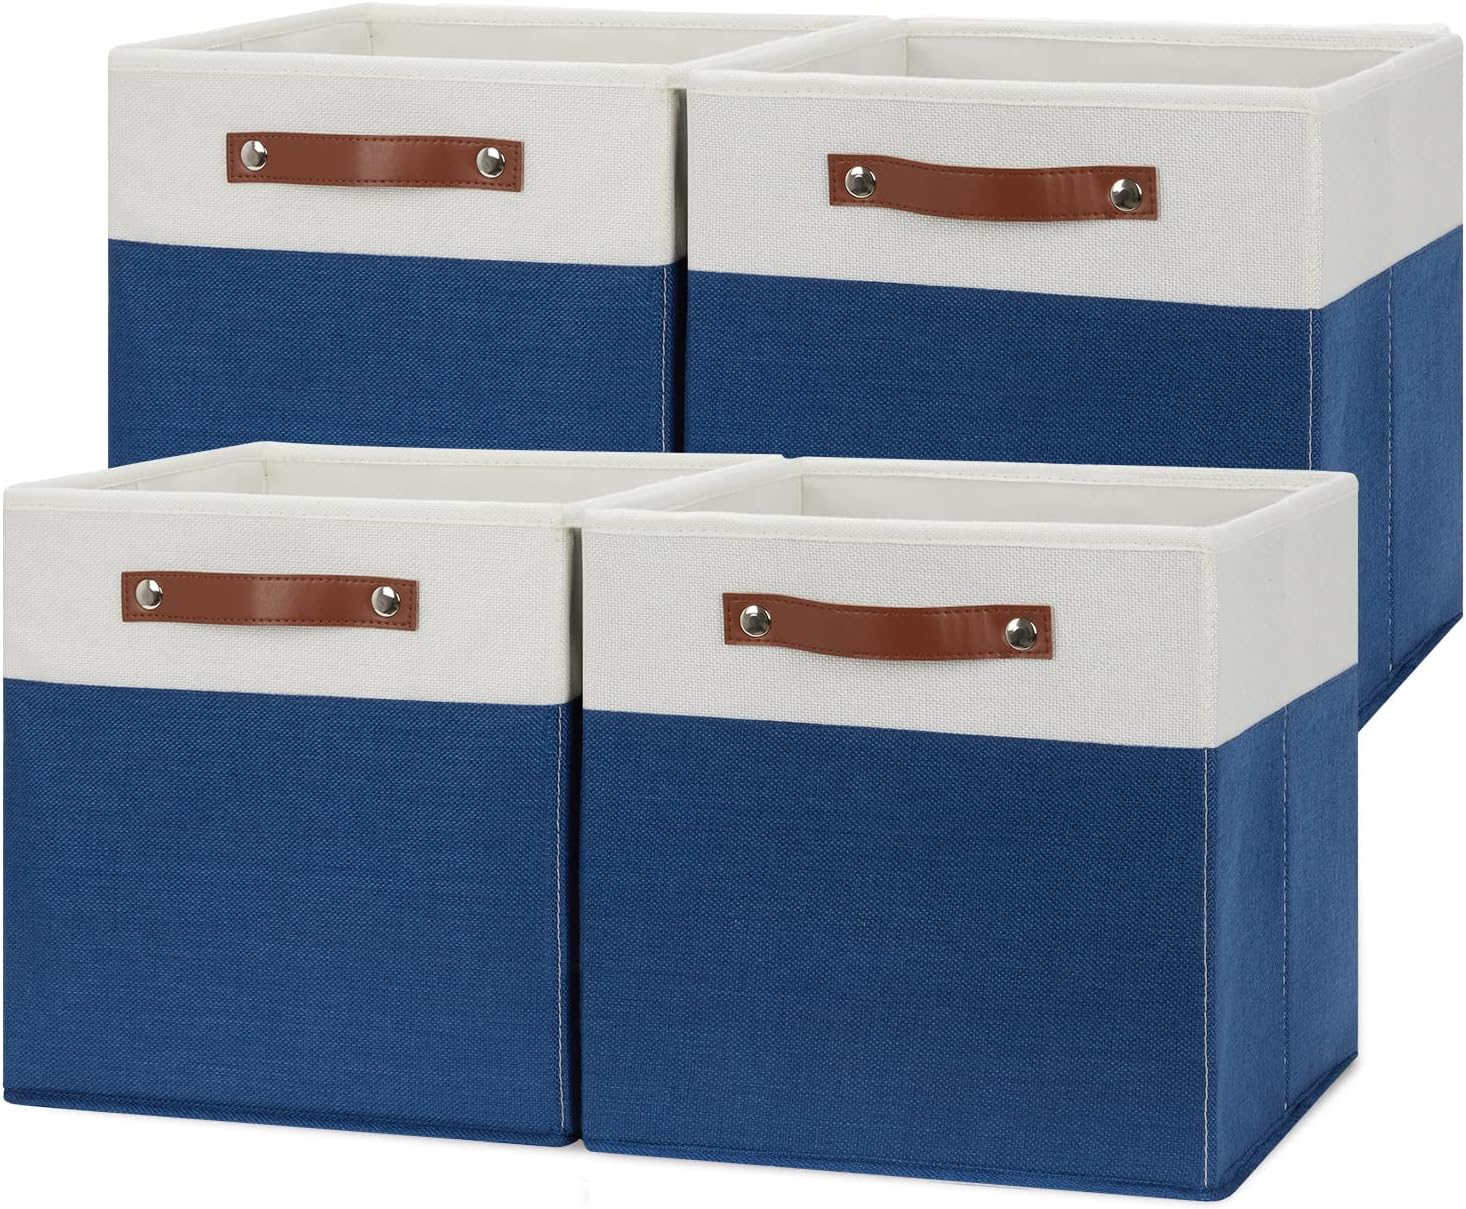 Temary Storage Cubes Bins 12x12 Storage Baskets Blue Cube Storage Bin with Handles for Organizing Home, Collapsible Storage Boxes for Toy Clothes (White&Blue)